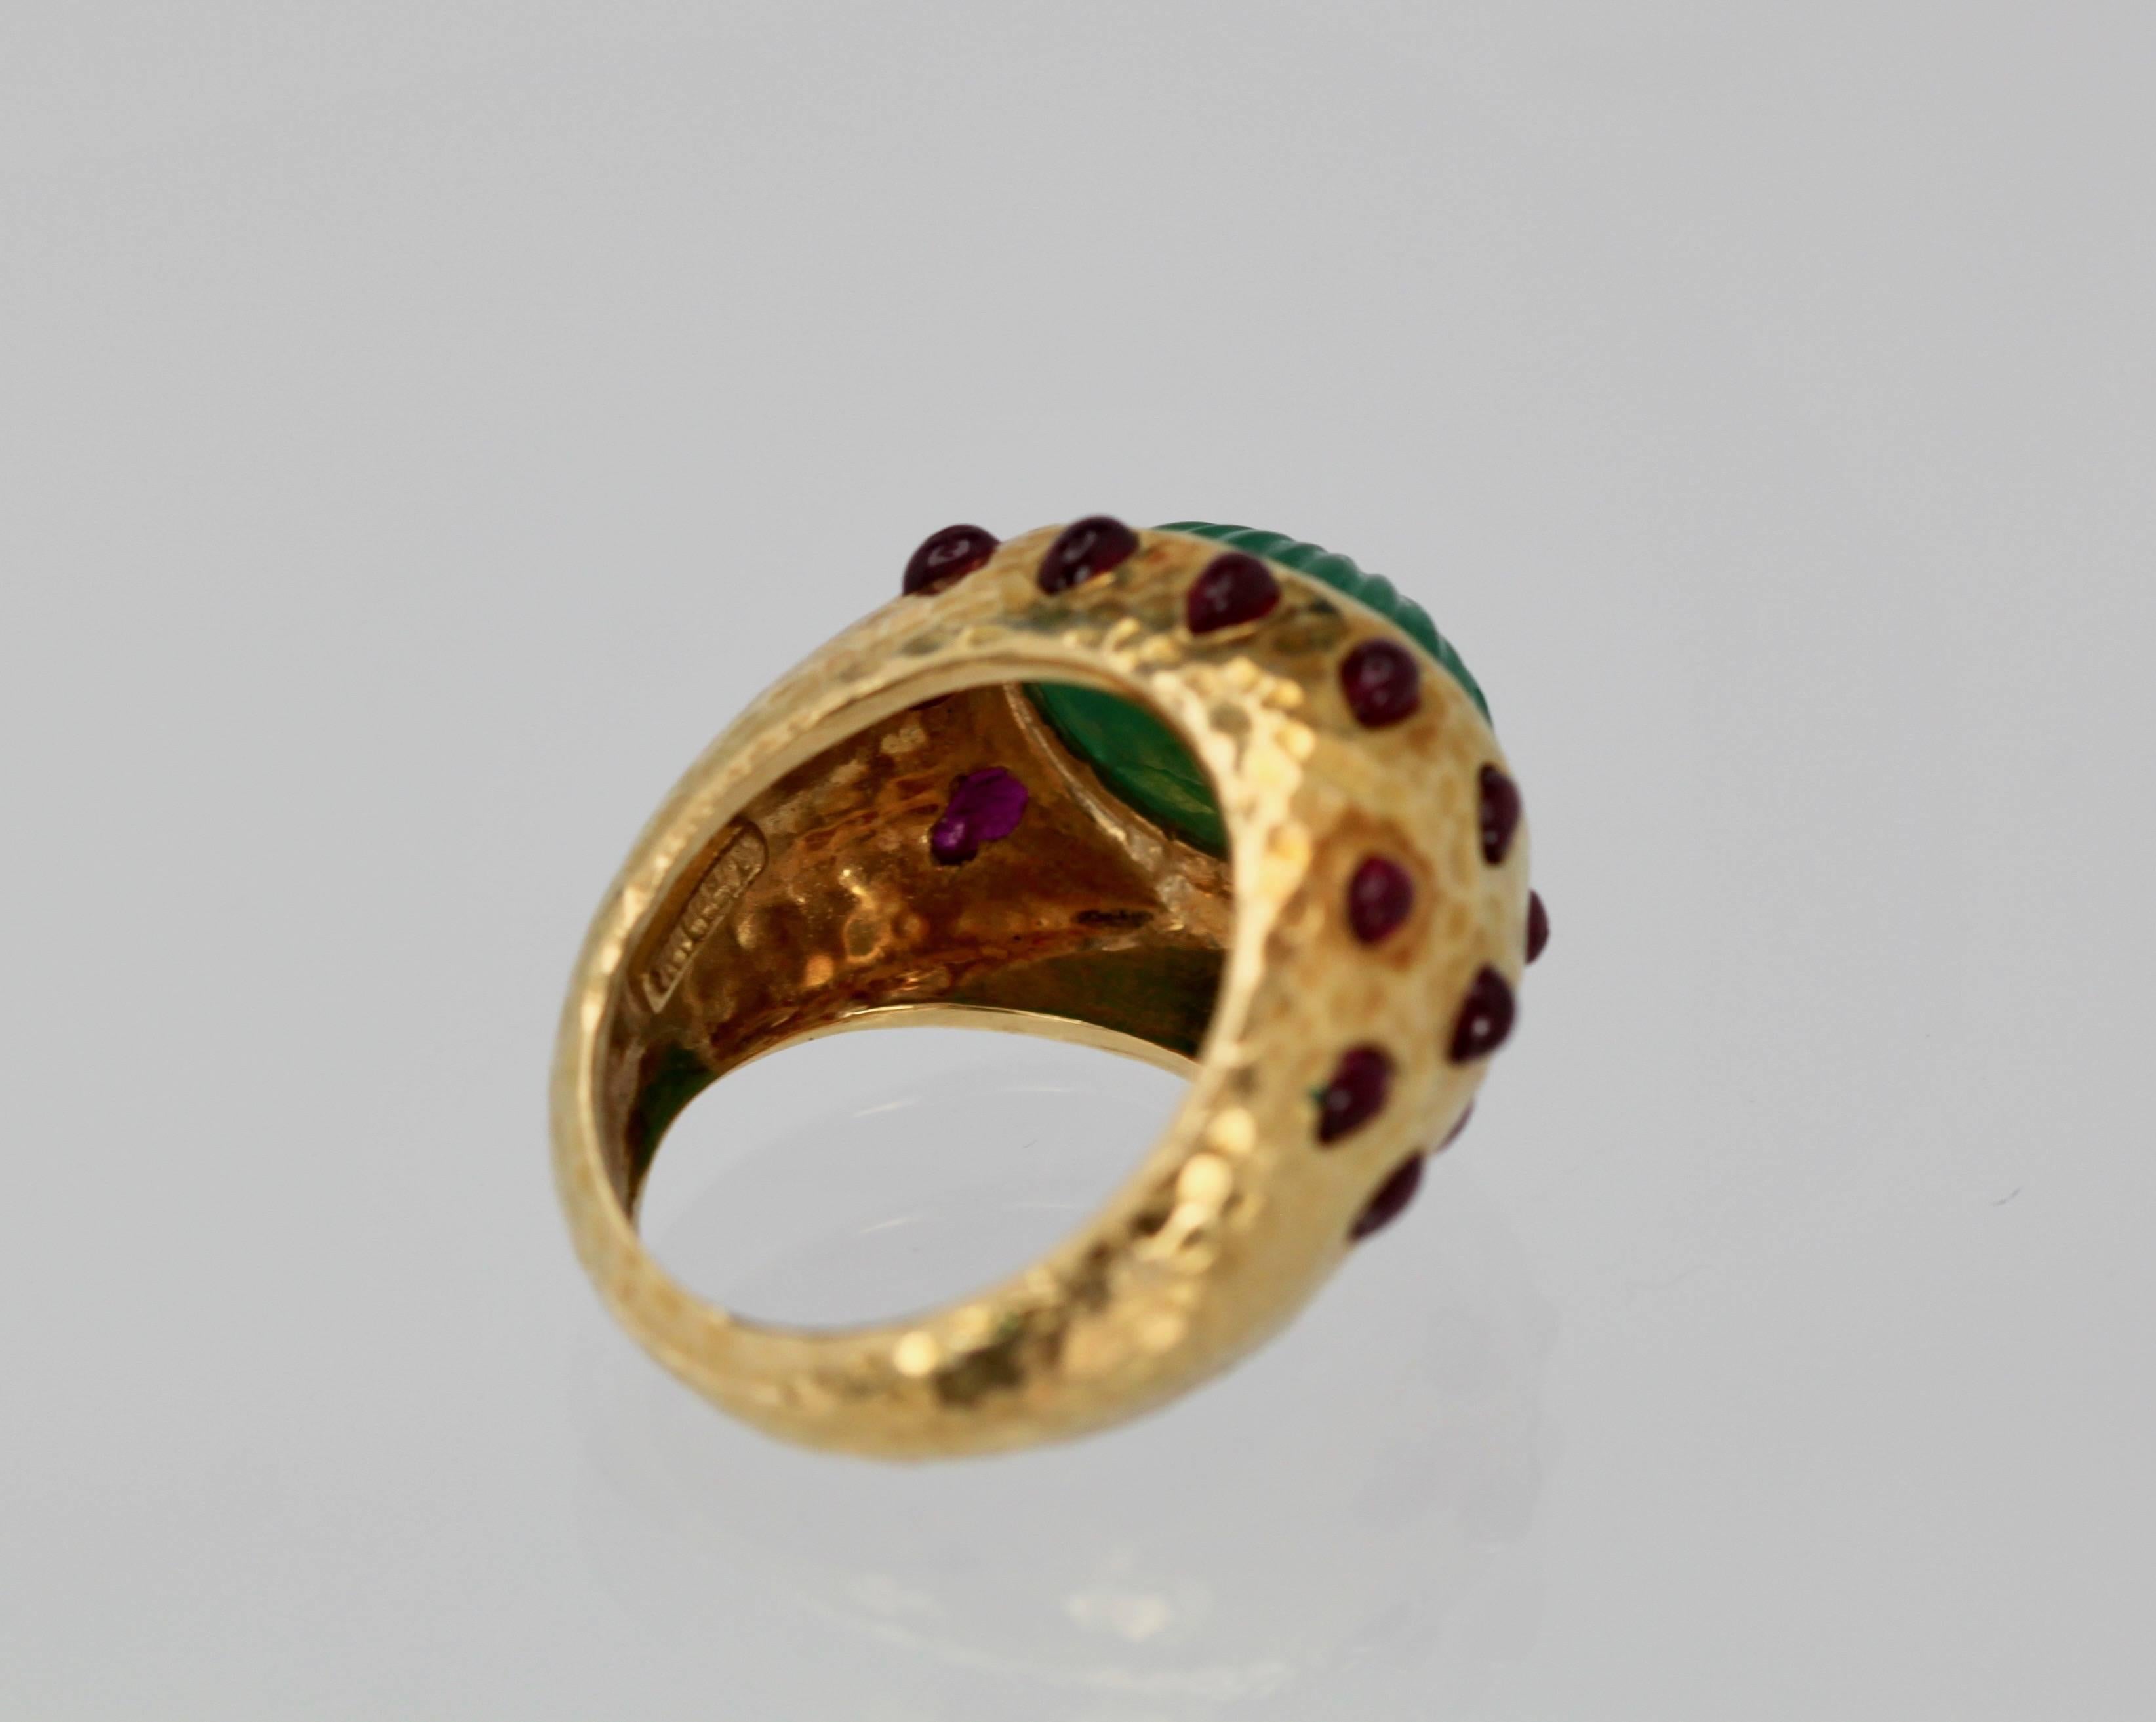 This ring is by no other than David Webb.  It has a hammered Yellow Gold finish with a Carved Emerald of approximately 8 carats and Ruby Cabochons ( 13) decorate the sides.  The ring is 15.03 mm across and 11.24 mm wide.  It weights 14.9 grams and